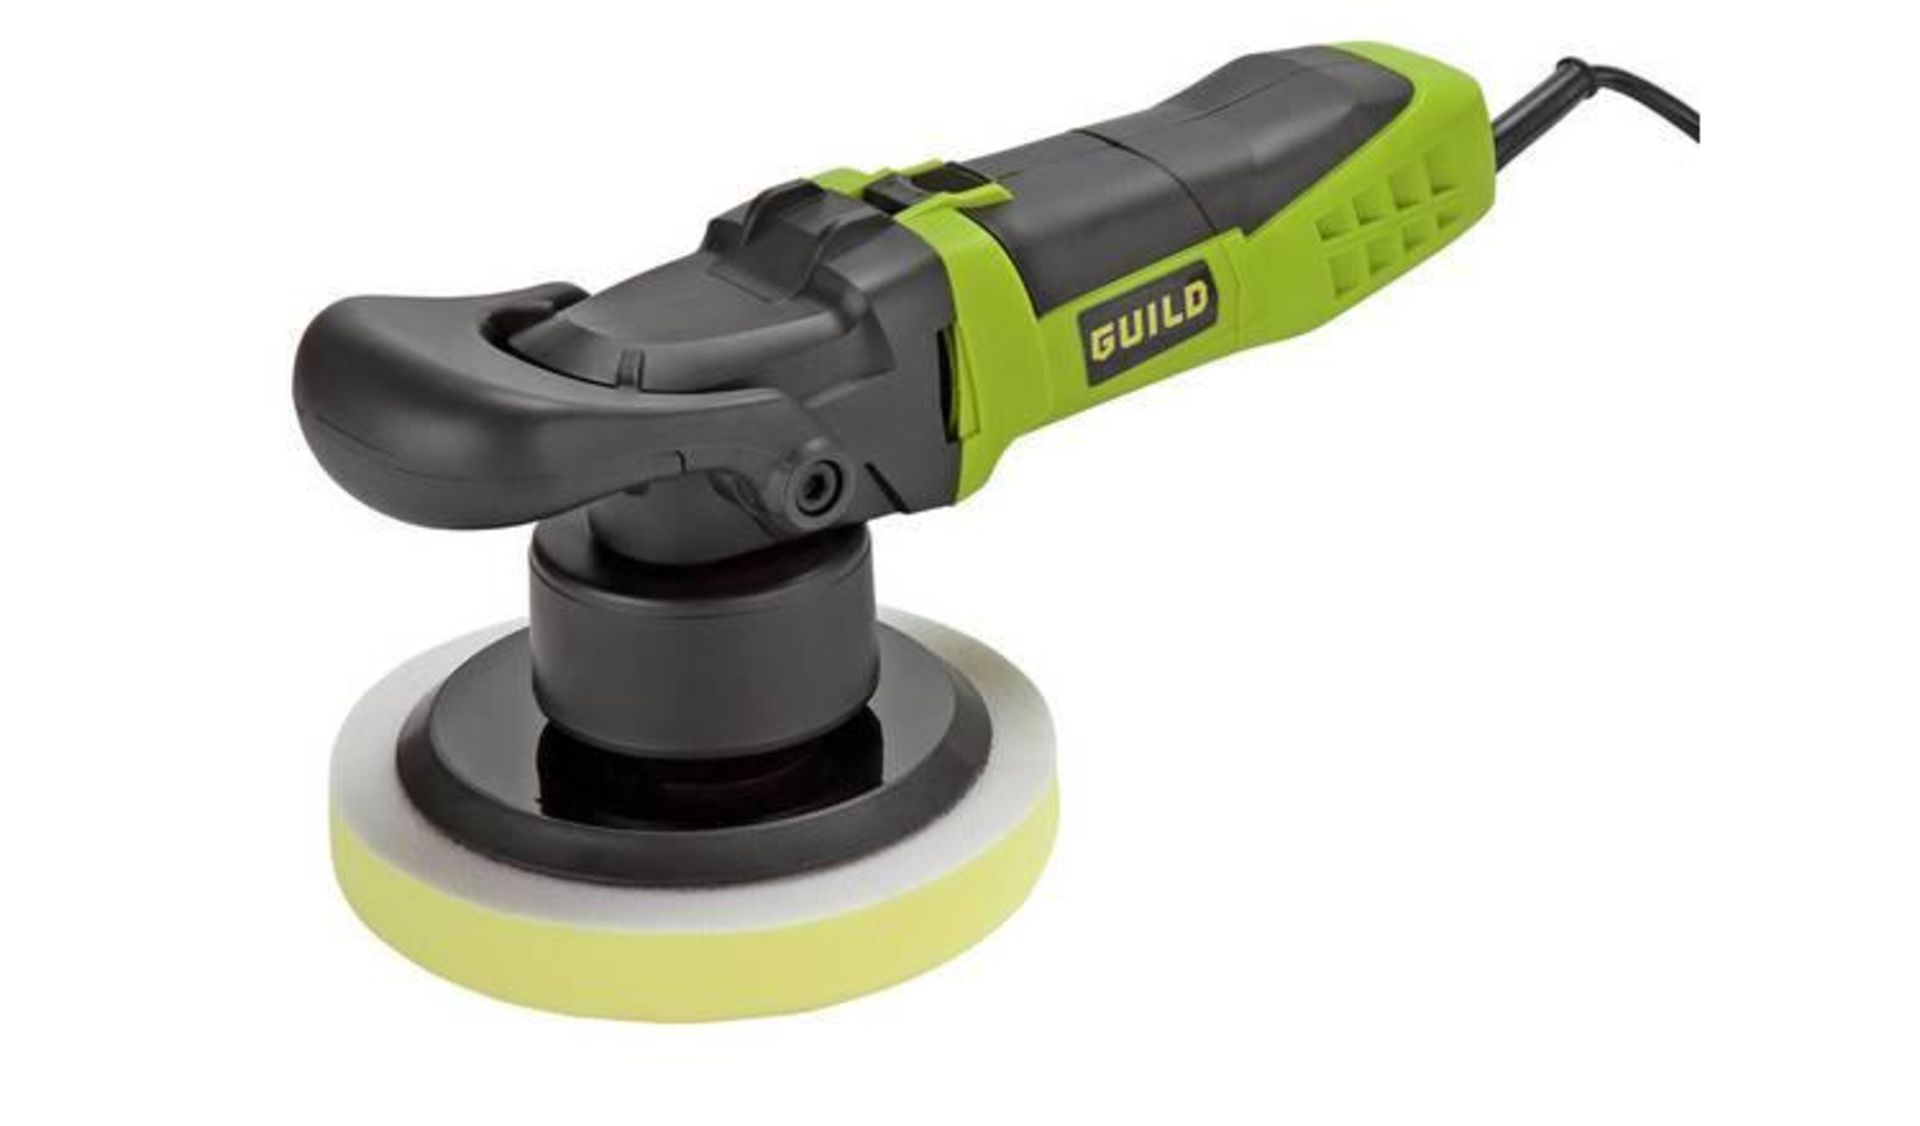 Guild Dual Action Car Polisher - £50.00 RRP